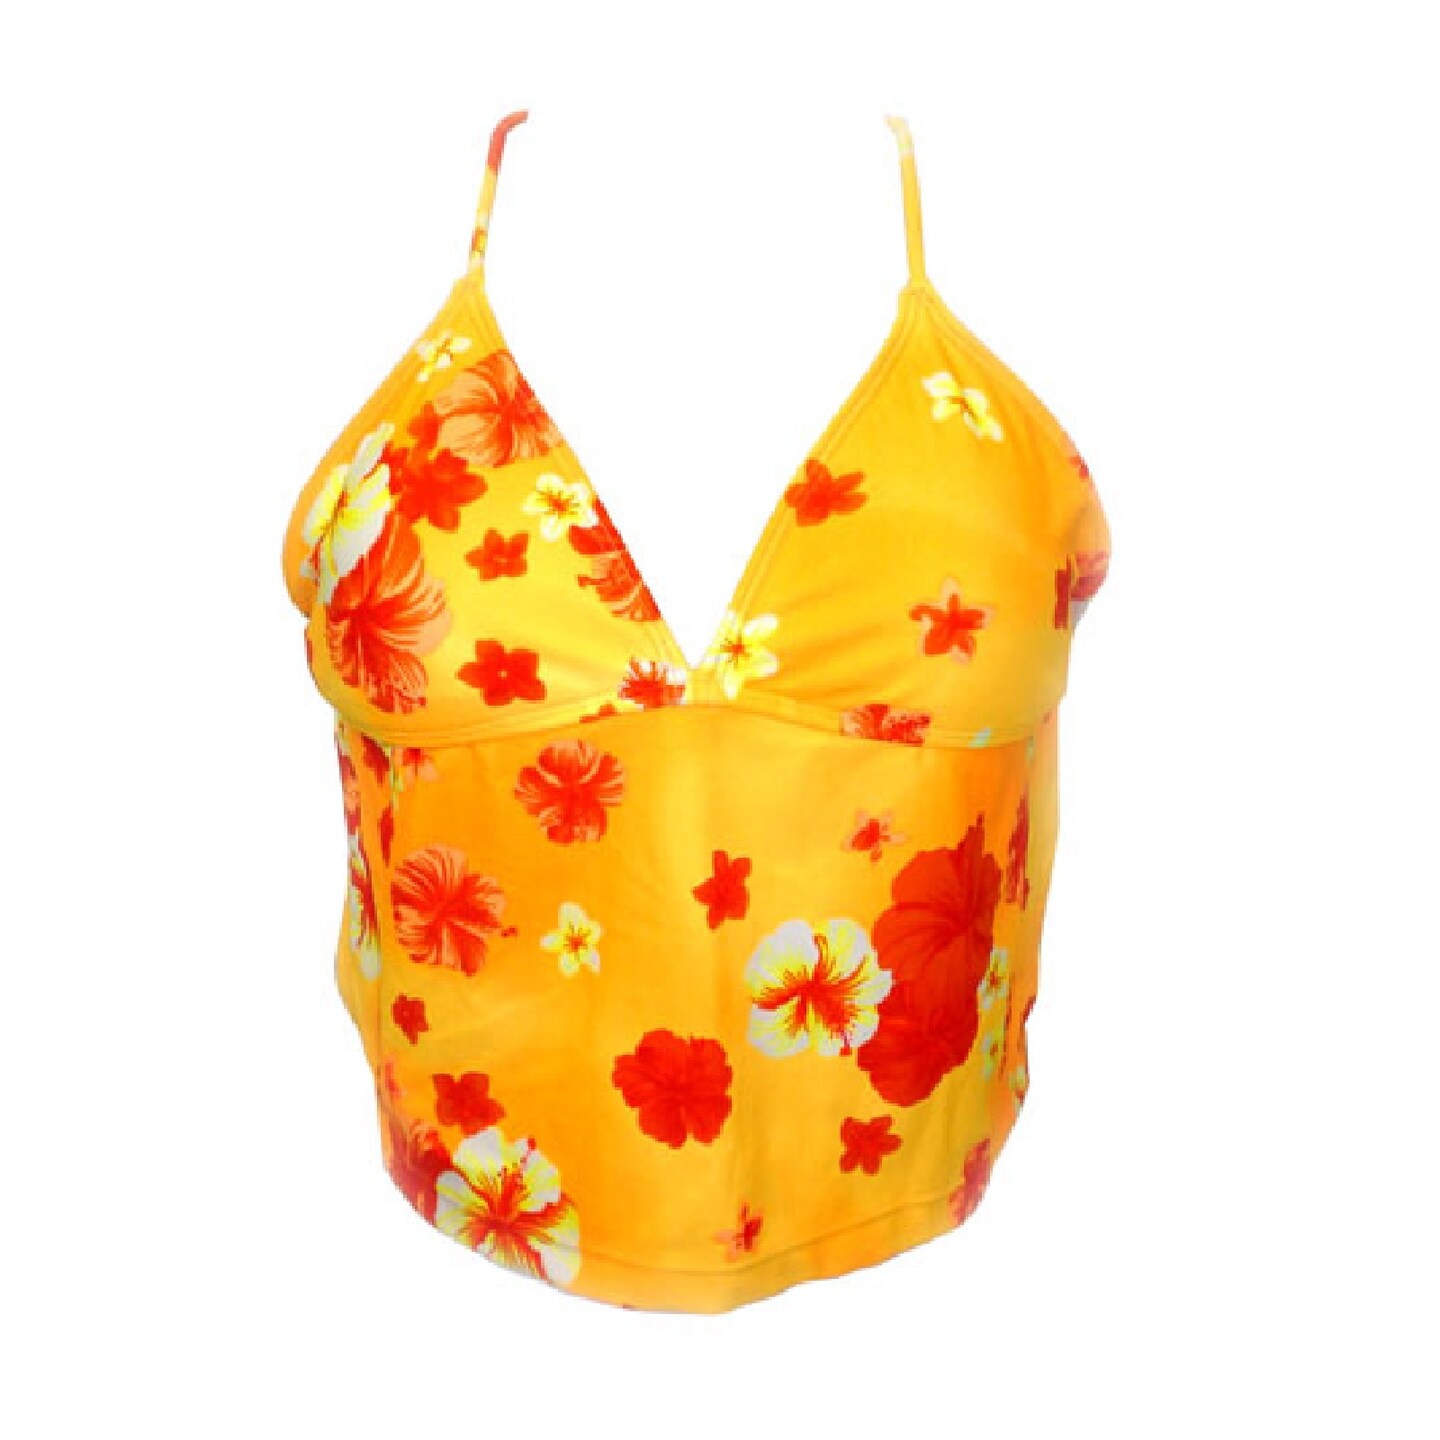 Merchant Overstock Exclusive Summer Girl Orange and Floral Apron Tri Bathing Suit Top - Small